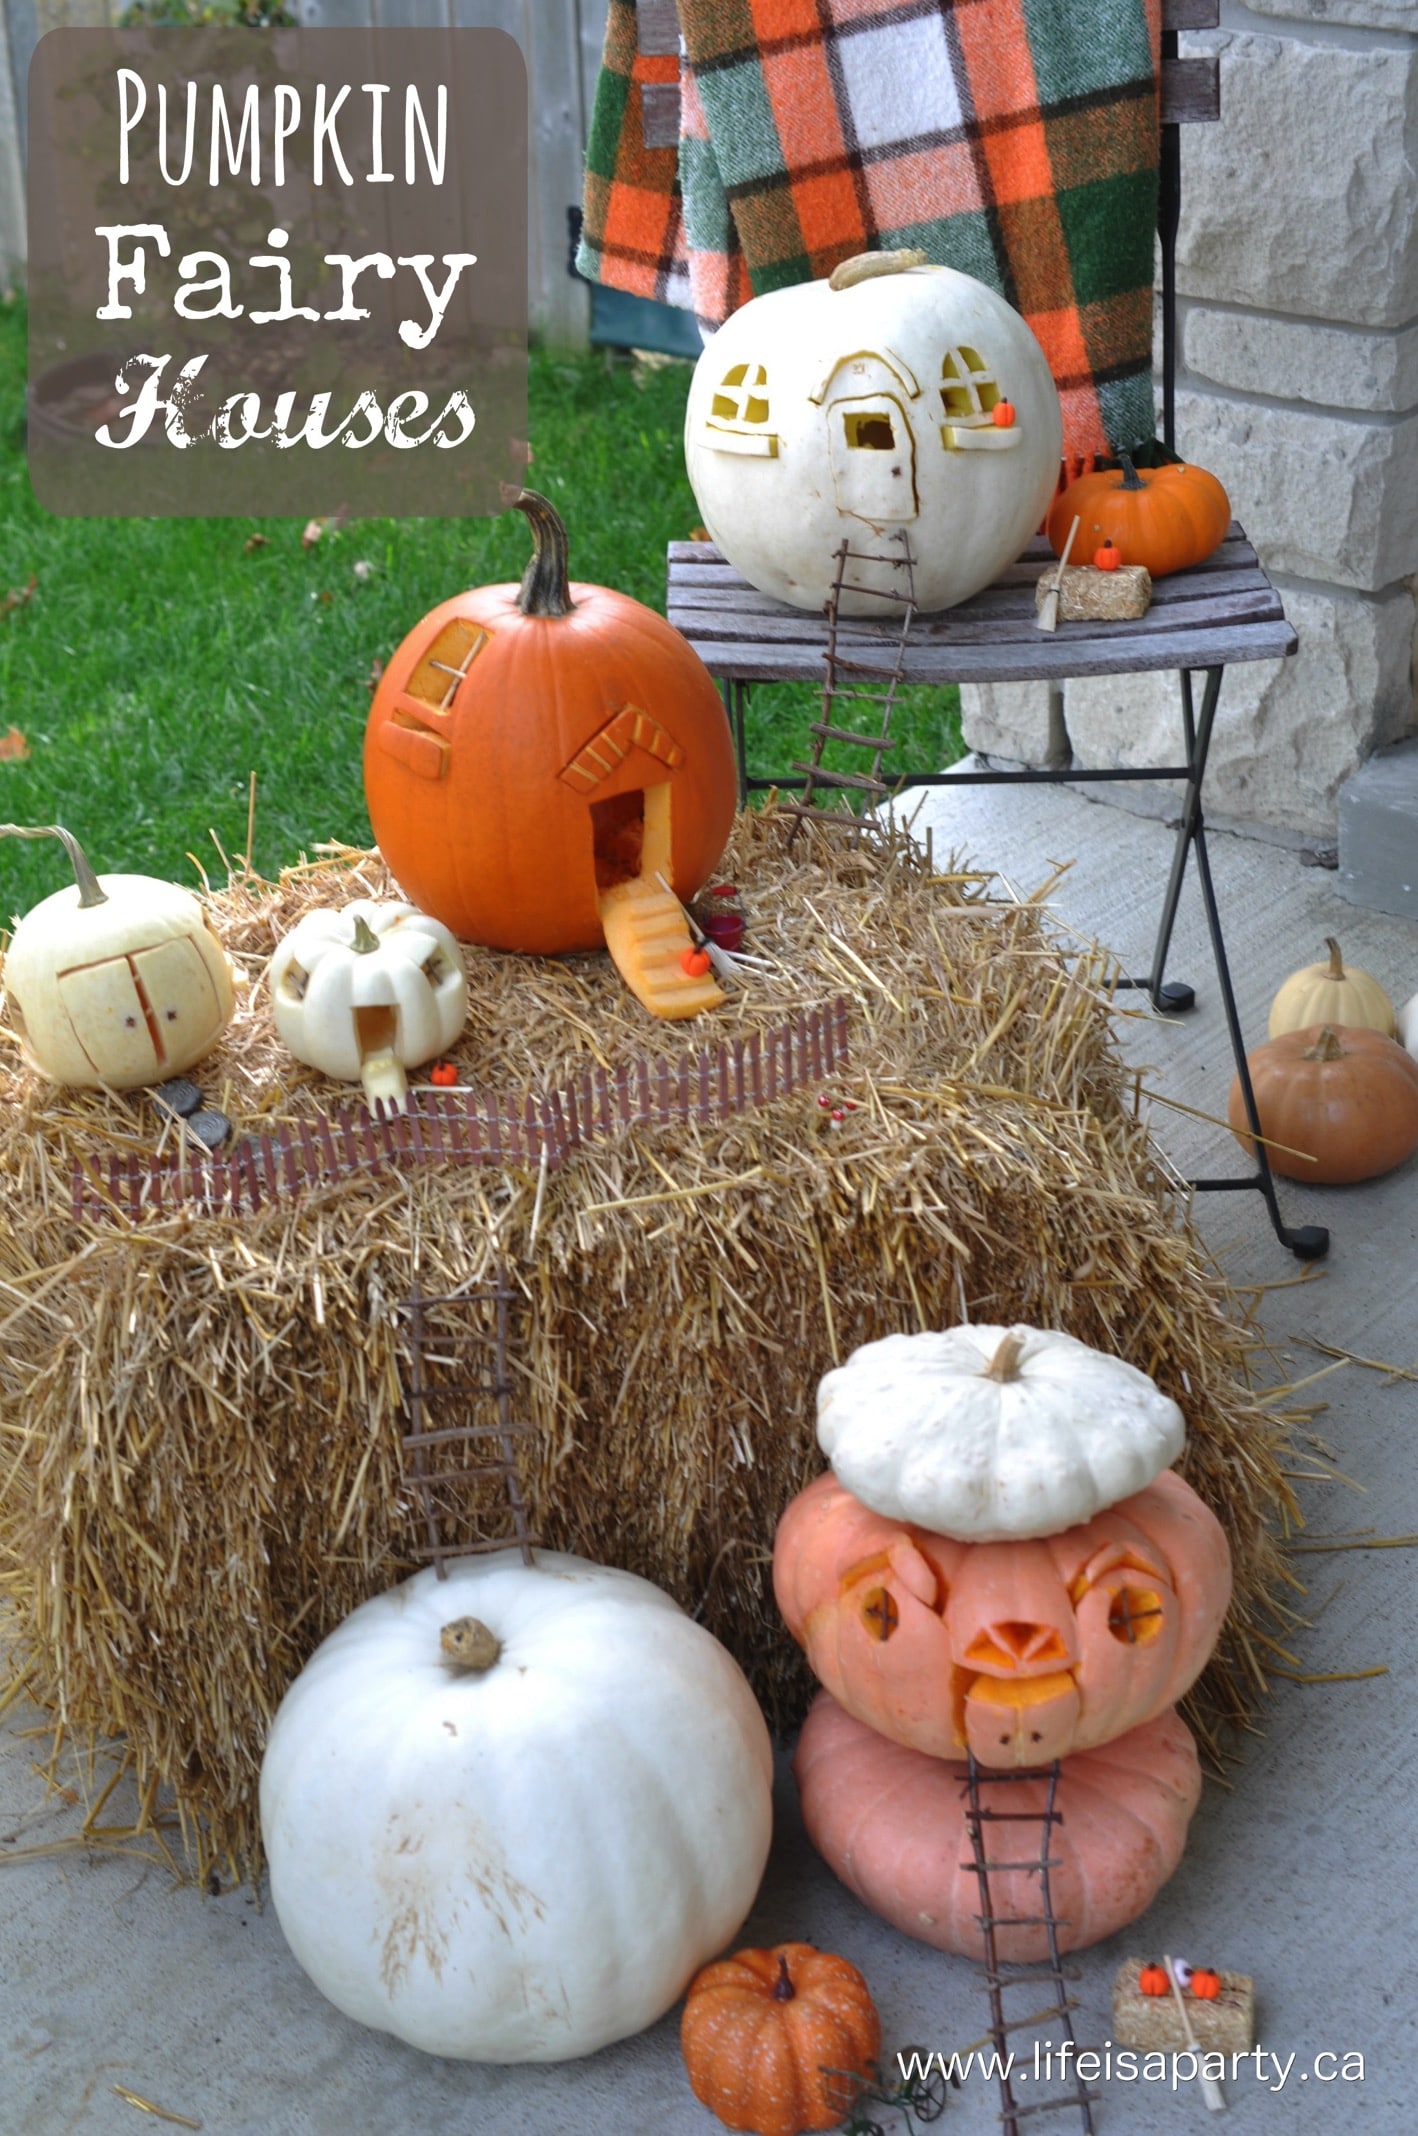 Pumpkin Fairy House Jack-O-Lanterns: this Halloween carve your pumpkins into fairy houses, and see the warm glowing light through the windows at night. Add a few fairy accessories and you have the perfect Jack-O-Lantern.